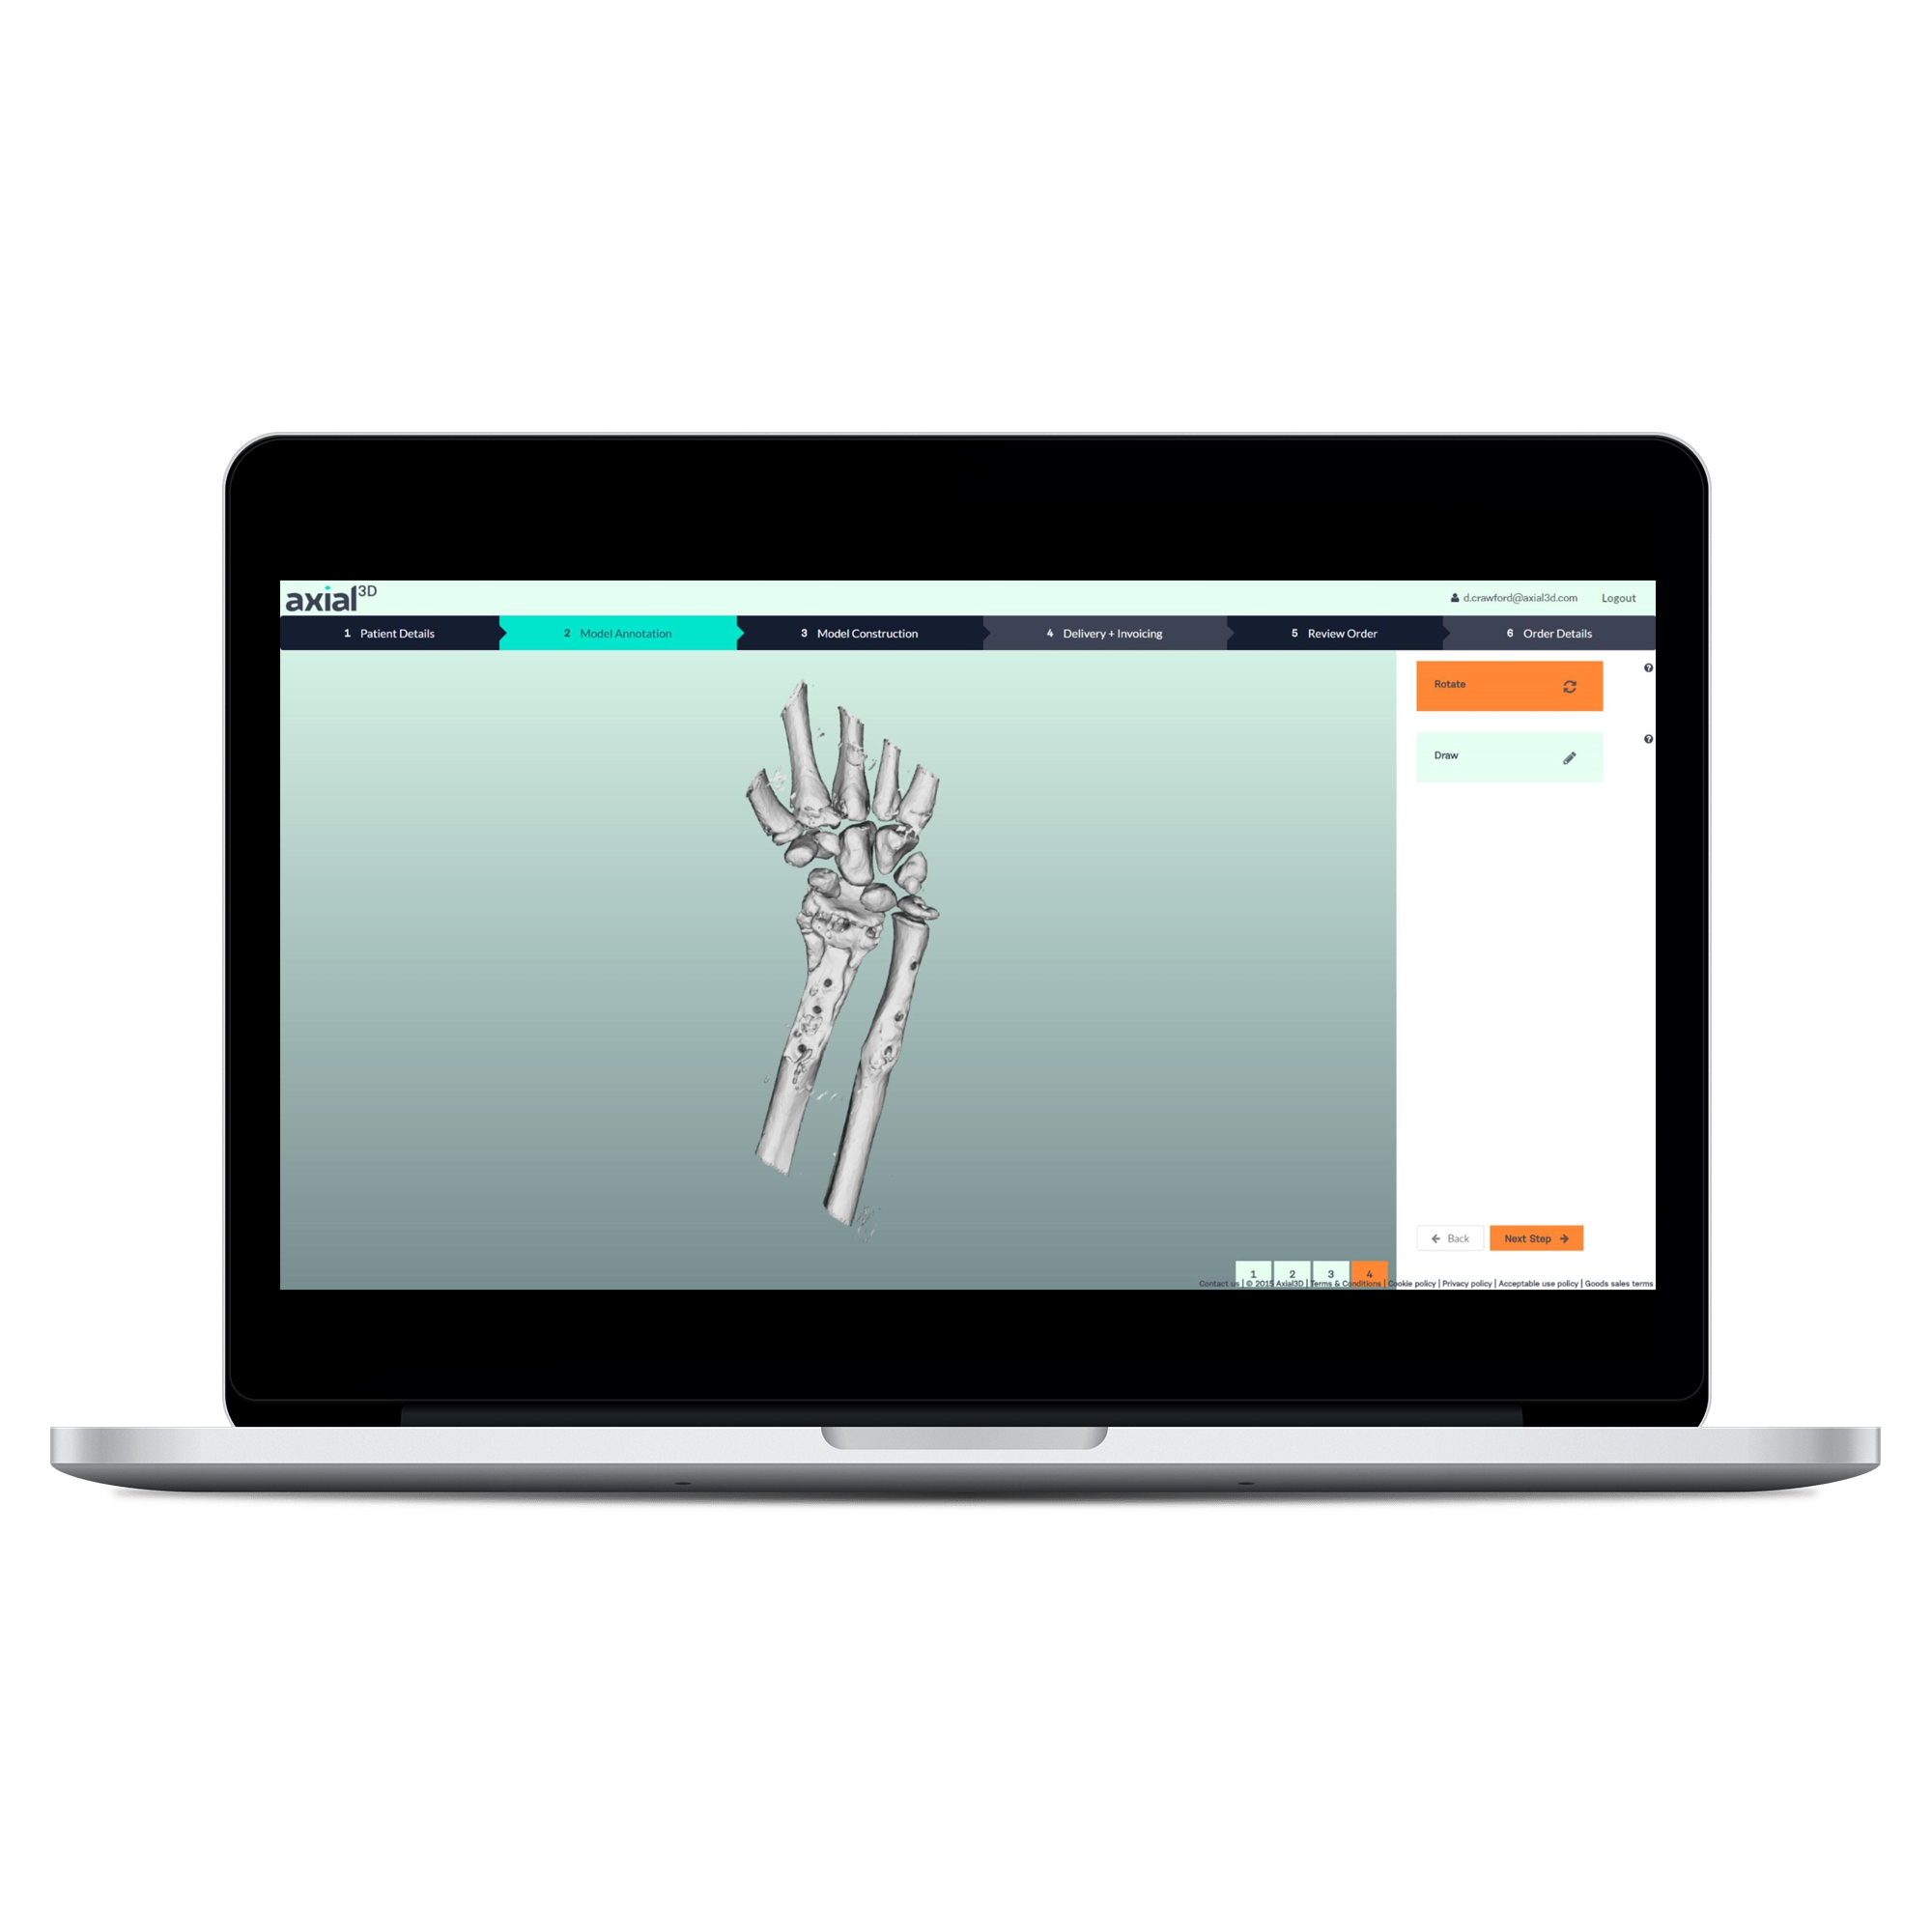 axial3D's award-winning online ordering software enables 3D printed anatomical models to be ordered and dispatched globally.